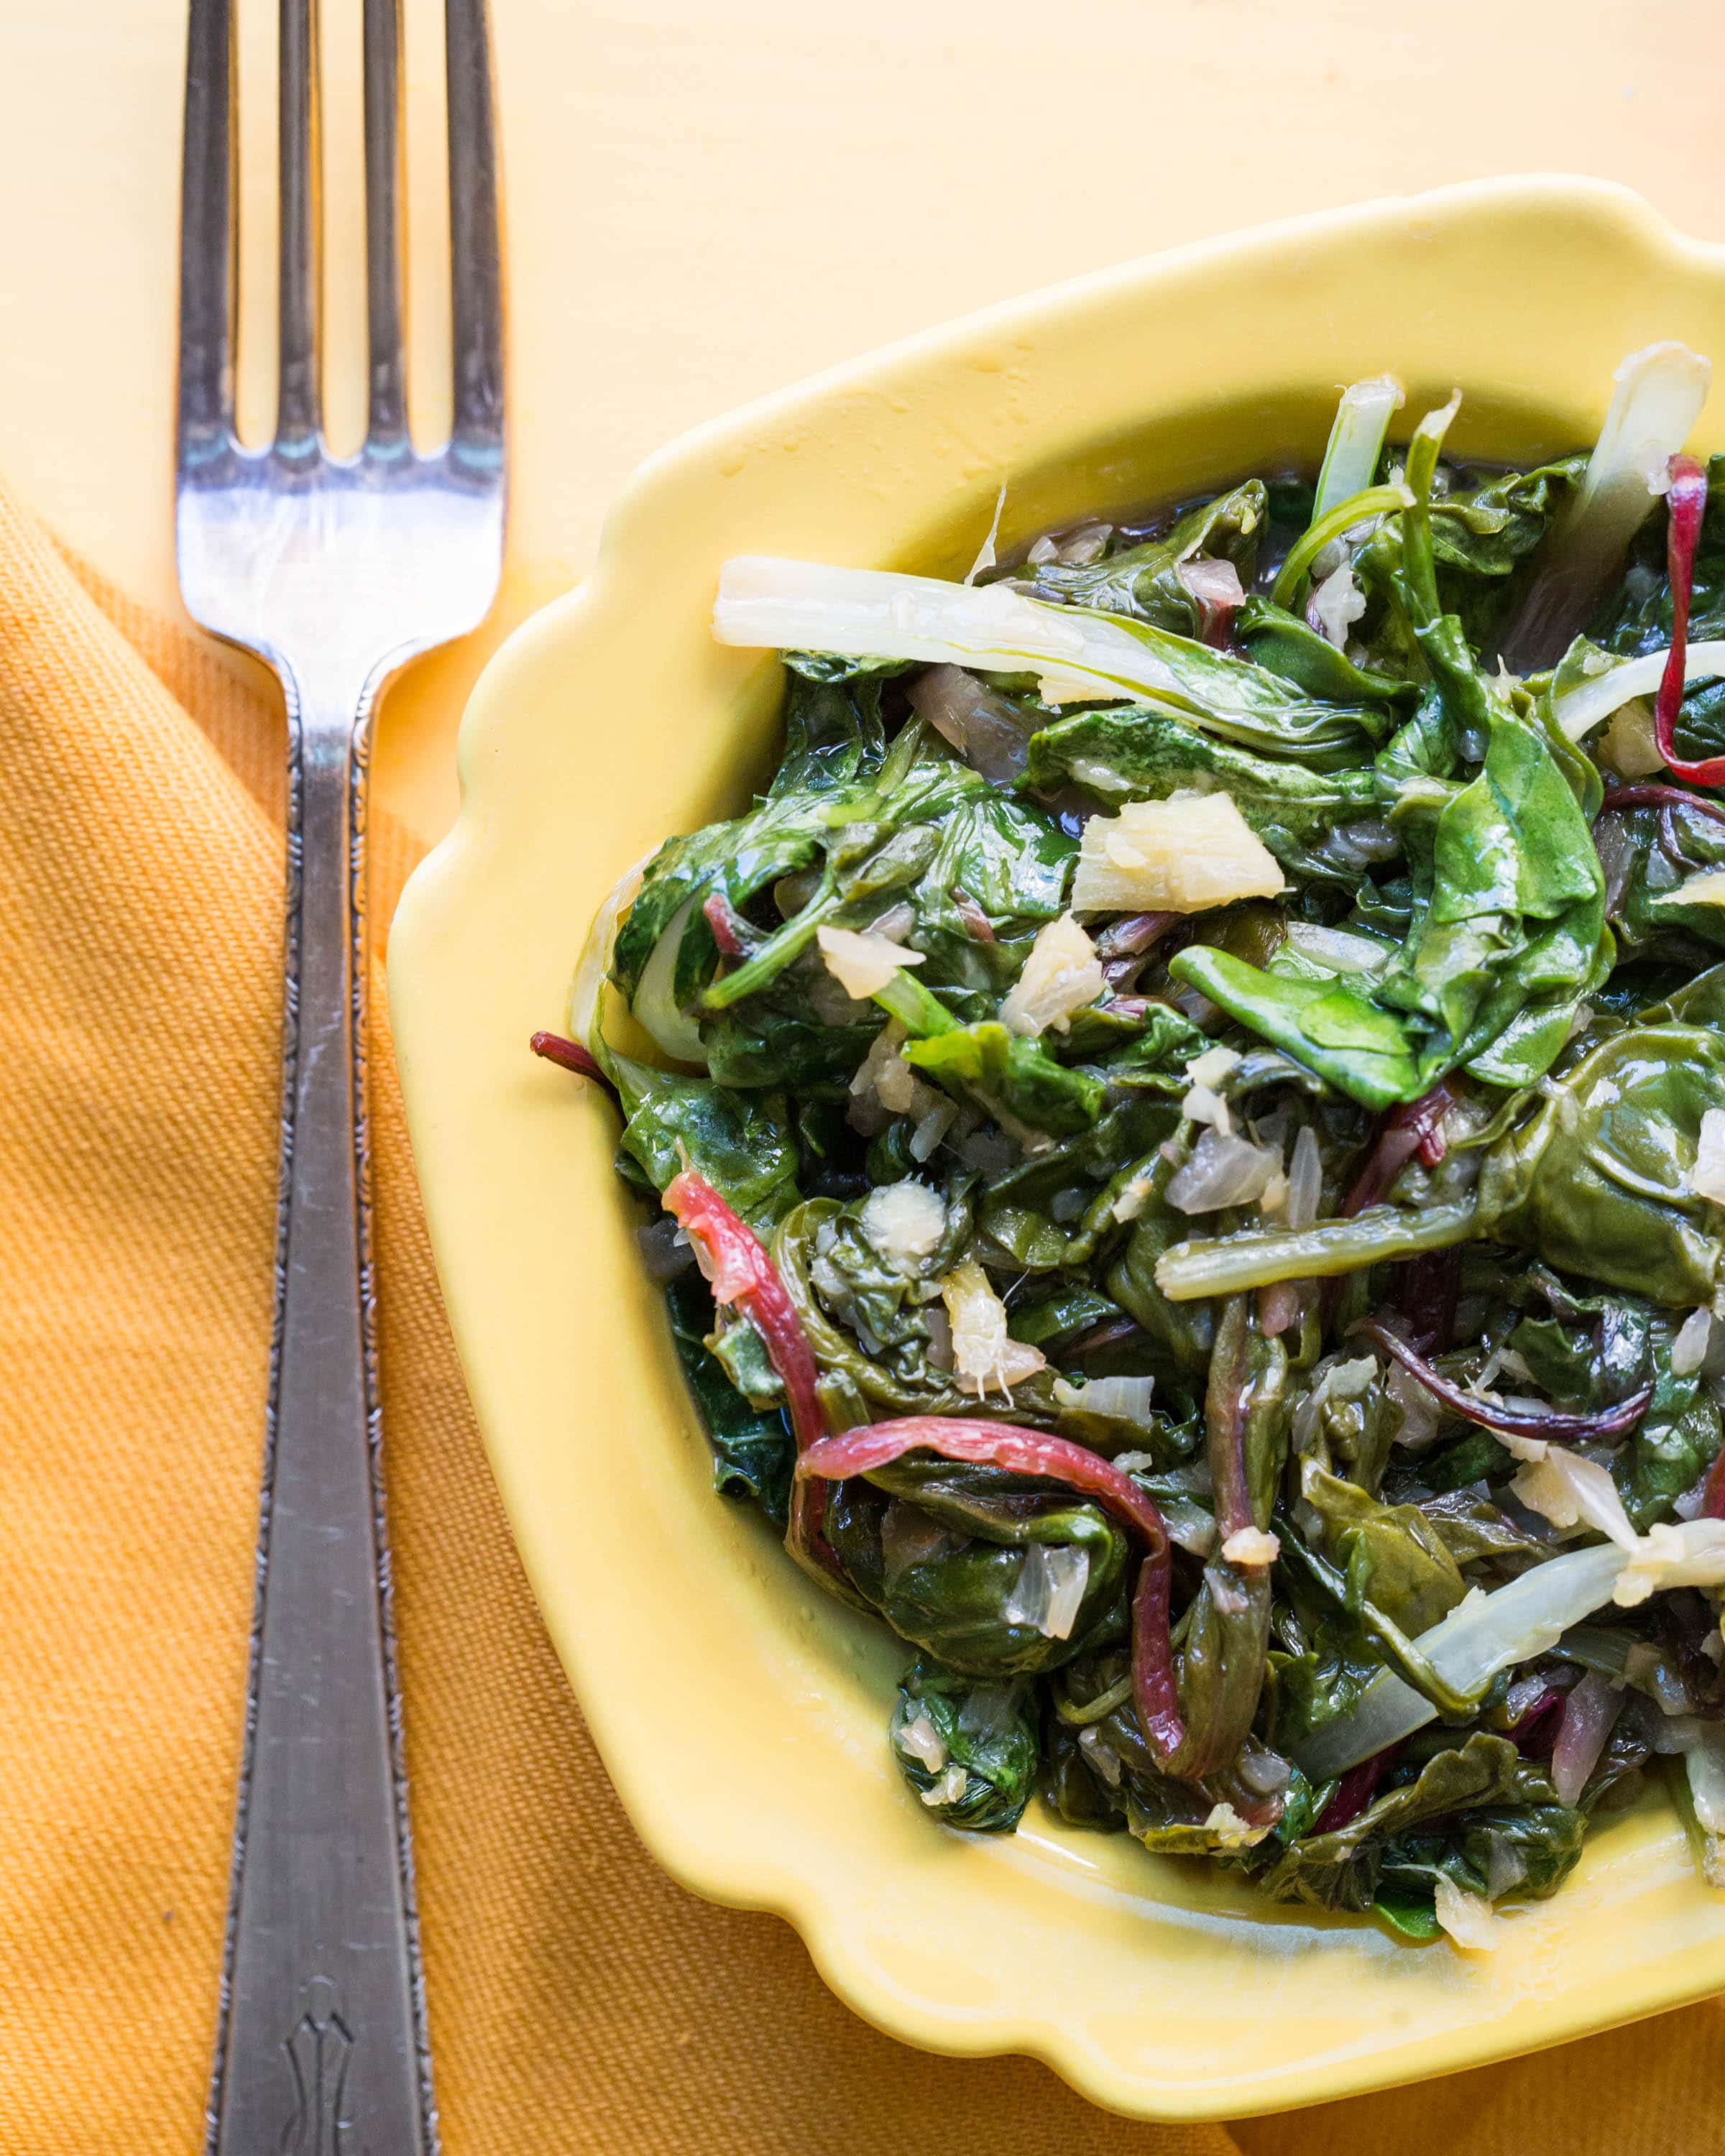 Yellow bowl with stir-fried Asian greens next to fork.